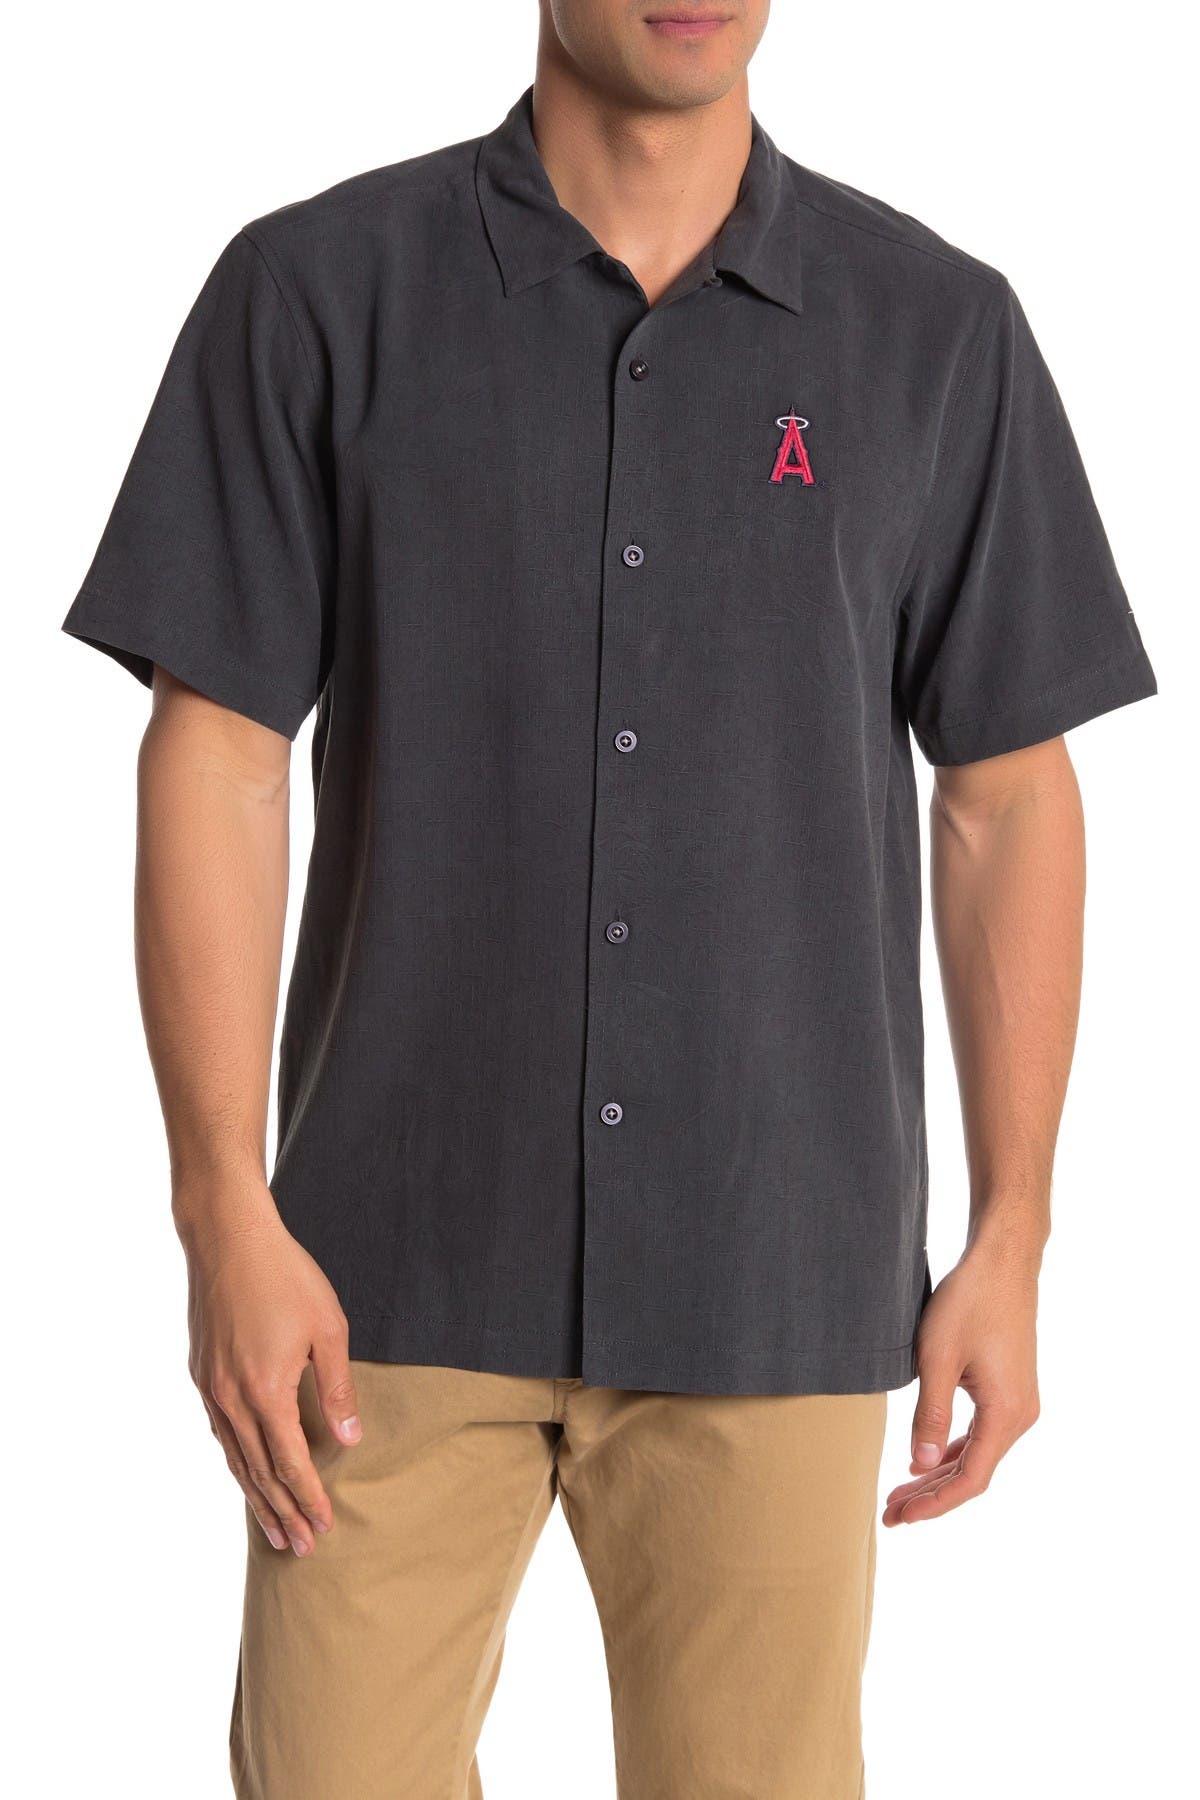 tommy bahama red sox